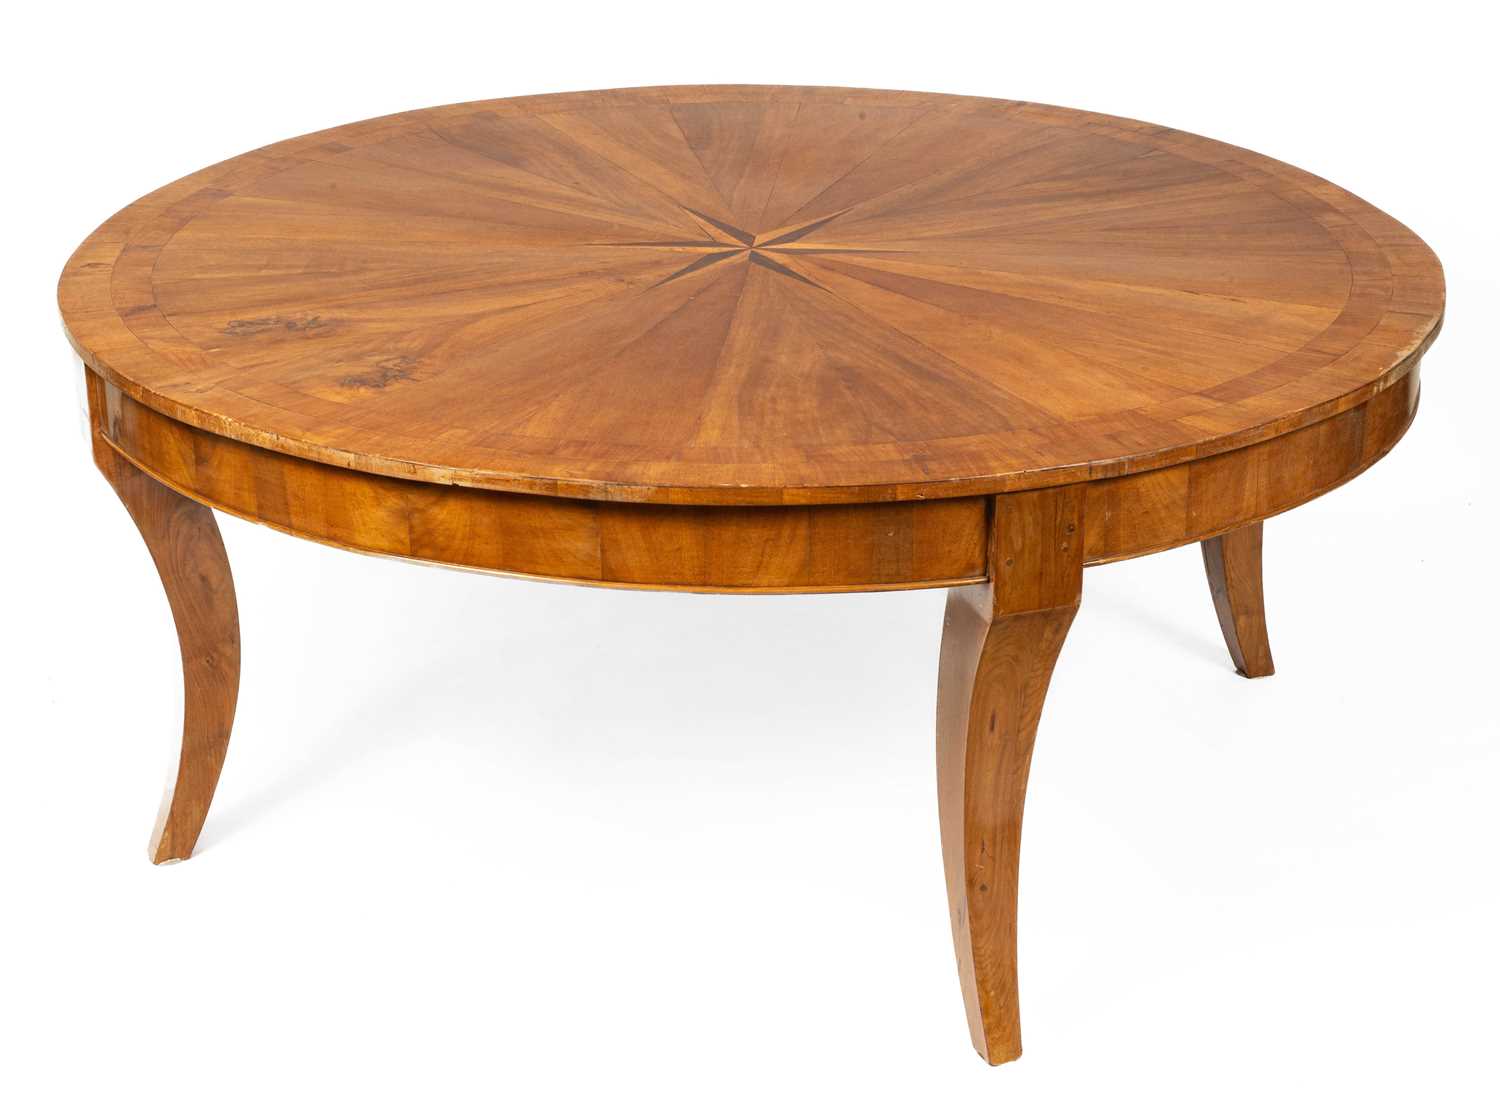 A large 19th Century Continental fruitwood crossbanded and star inlaid dining table or centre table